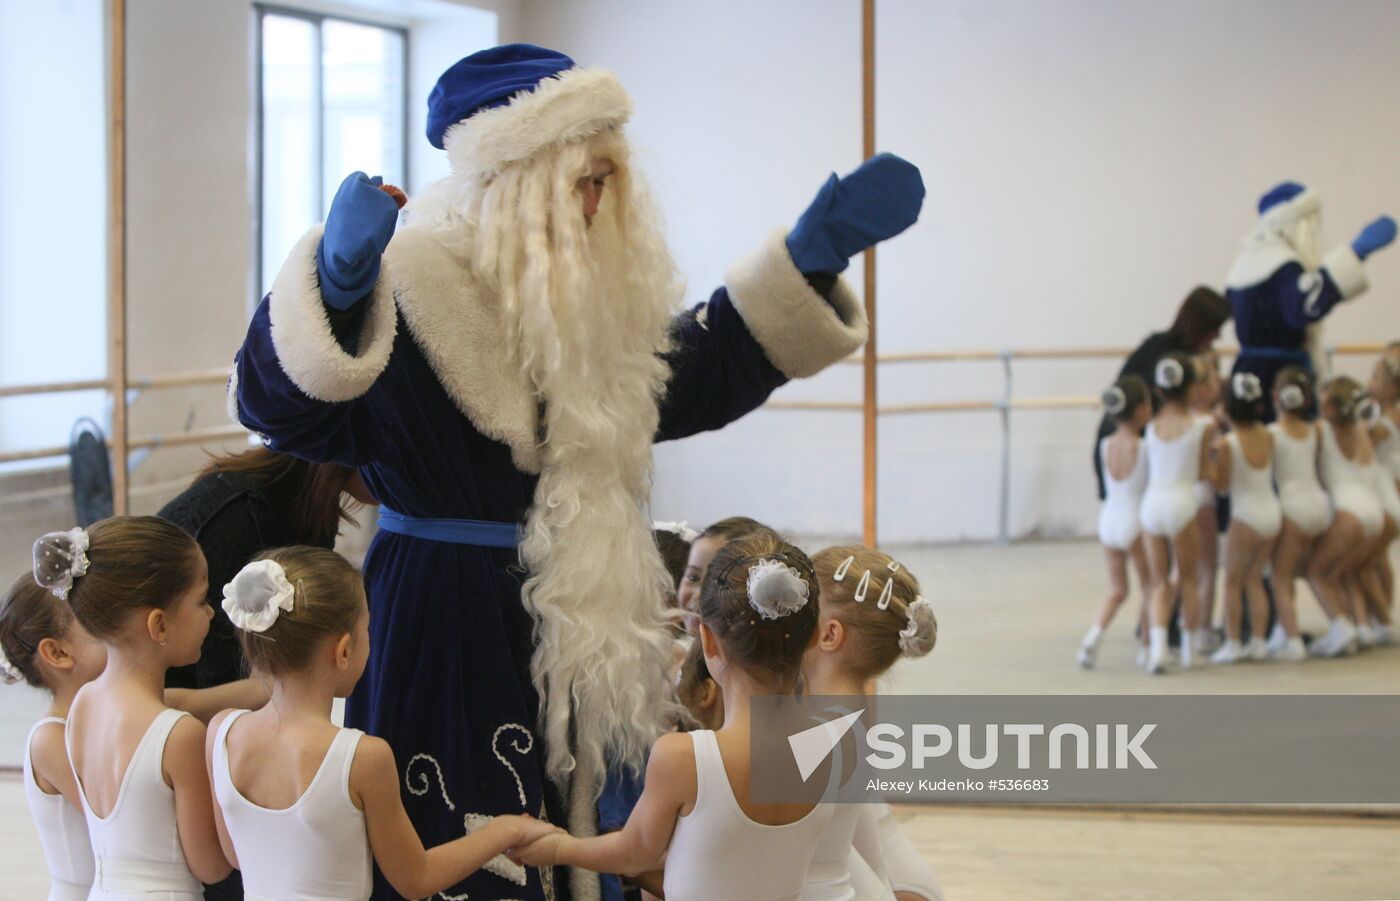 Moscow Santa Claus School holds holiday exams